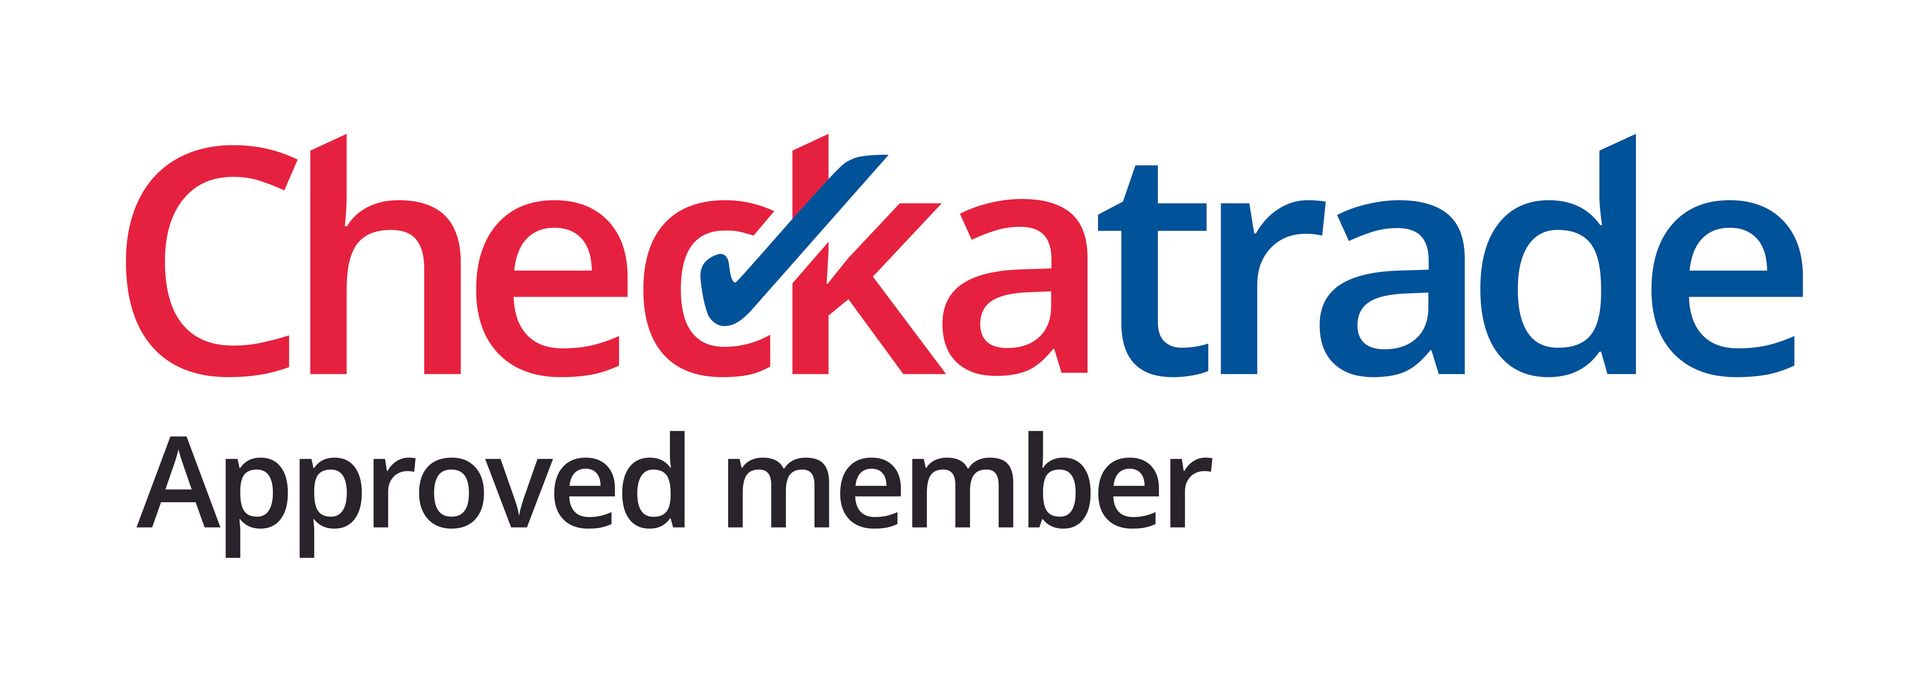 A checkatrade approved member logo on a white background